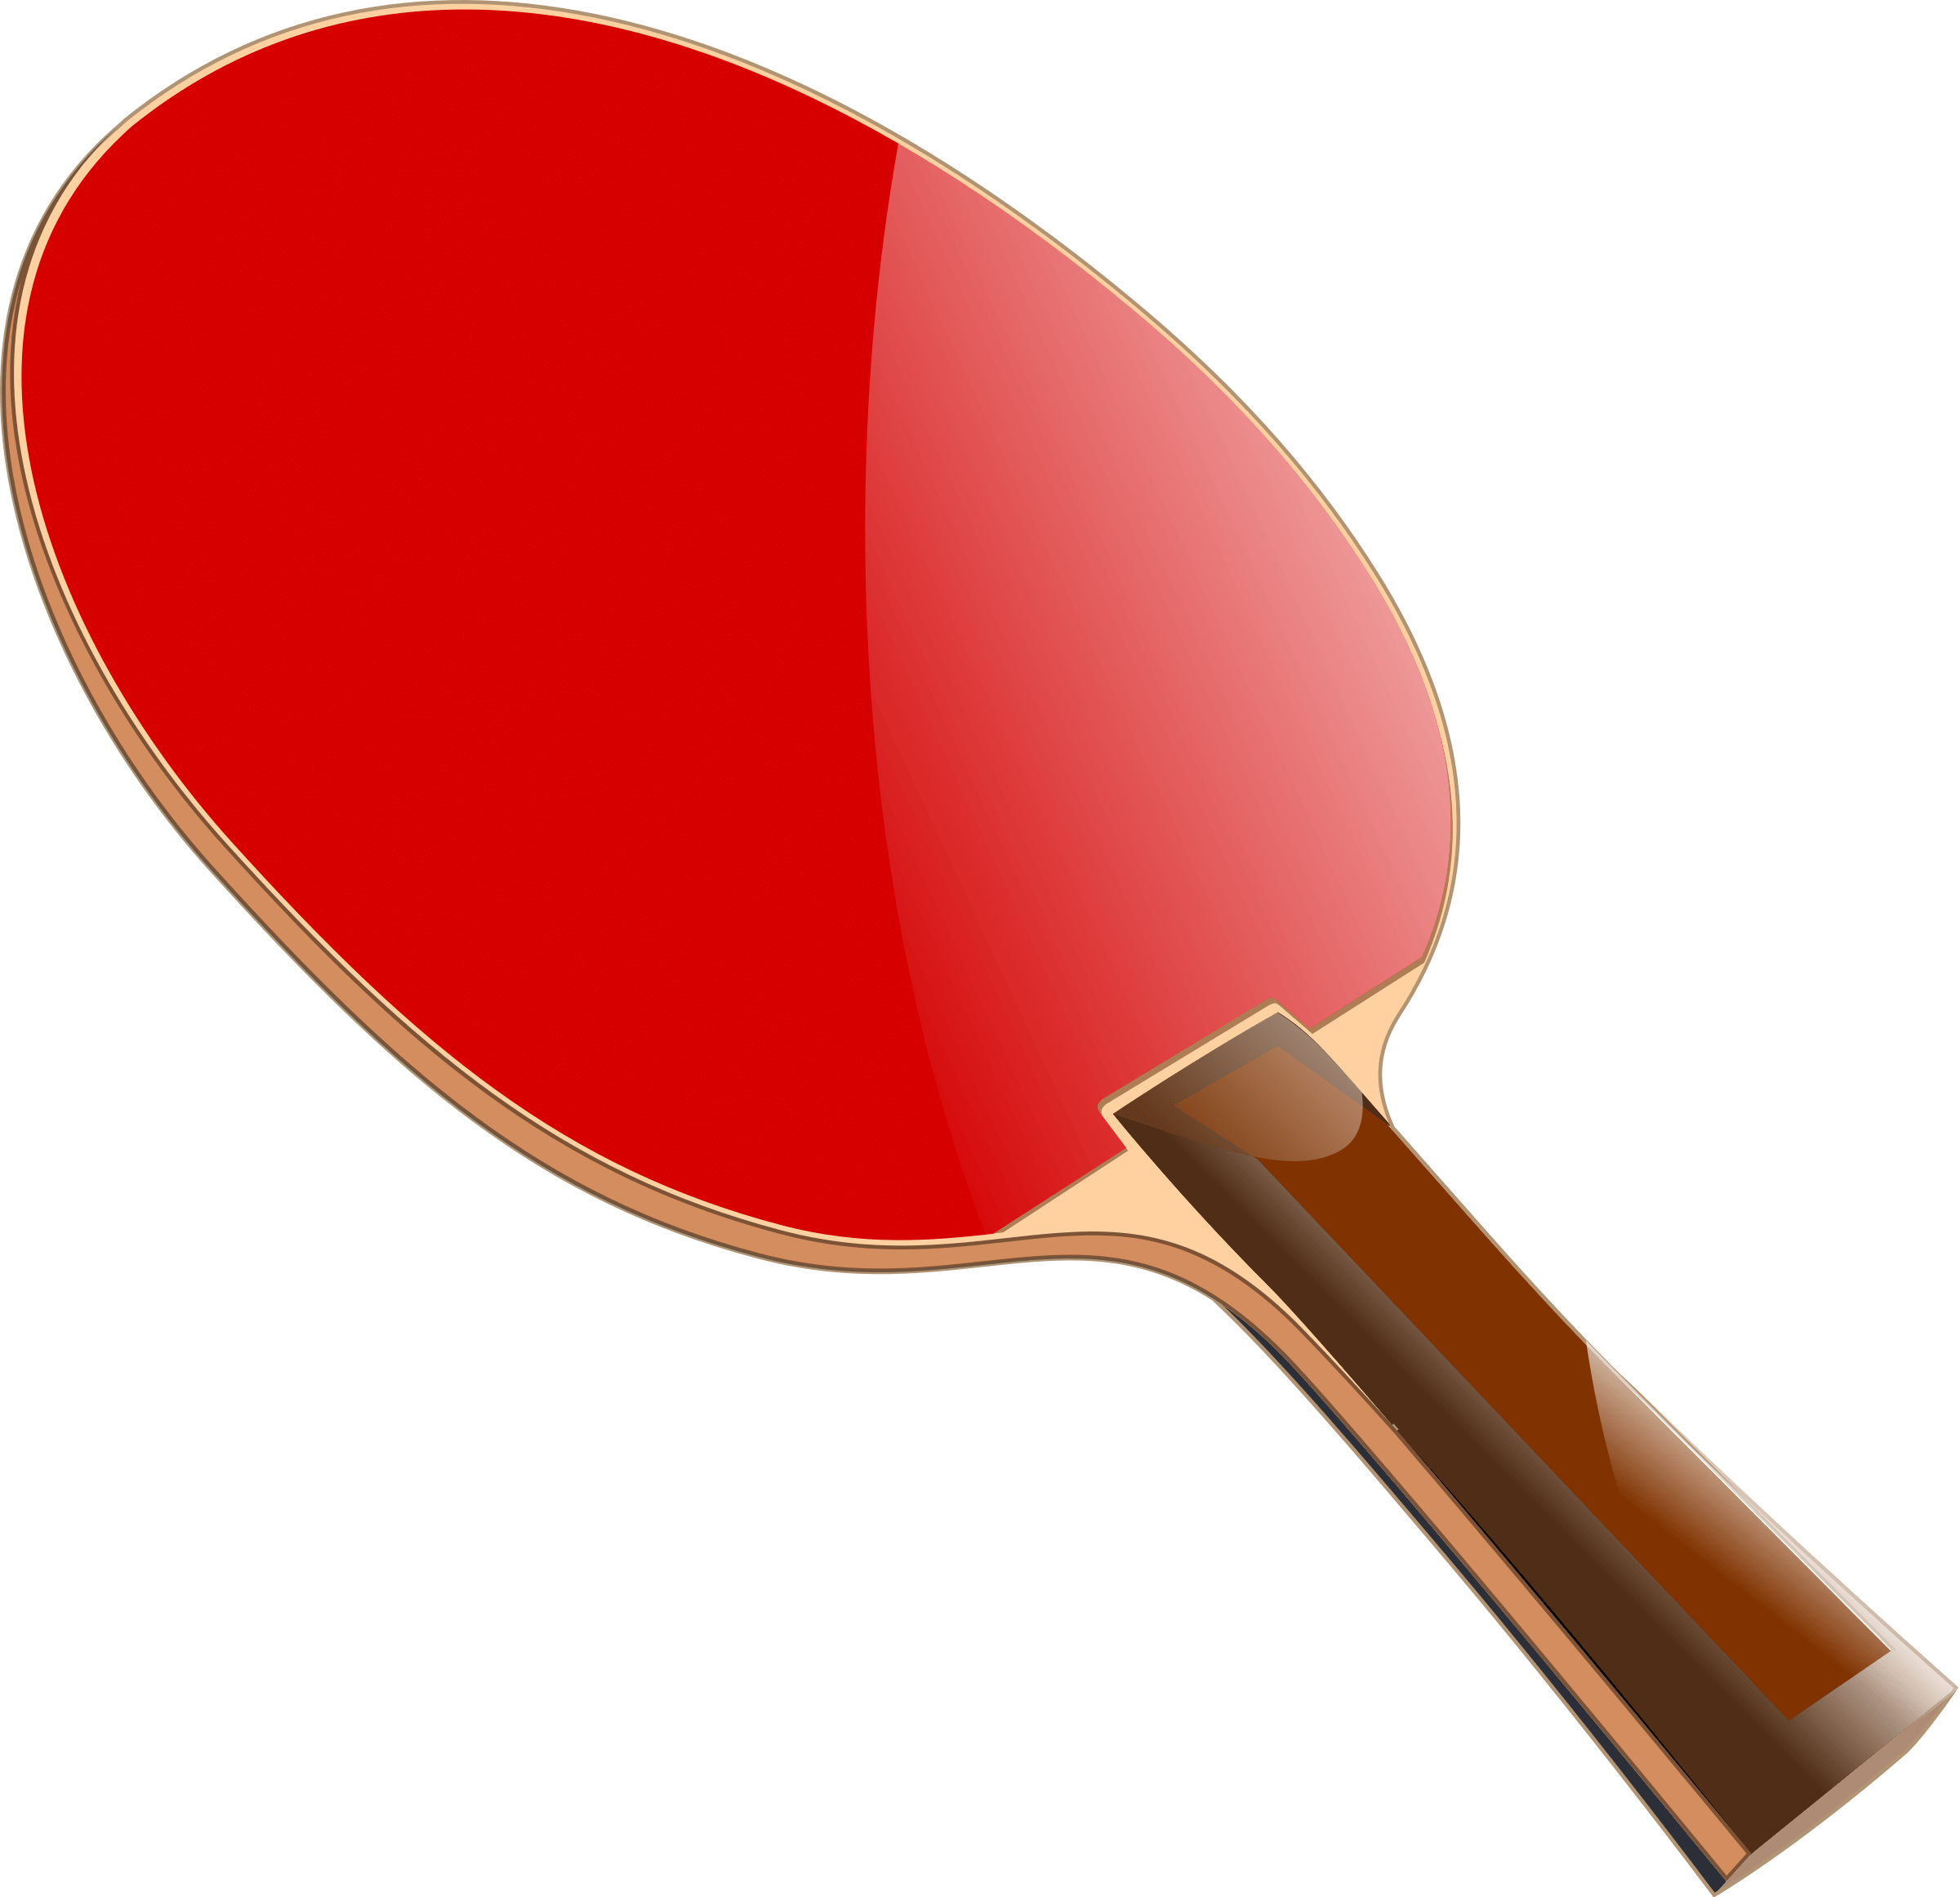 Sports clipart table tennis. Racket clip art red